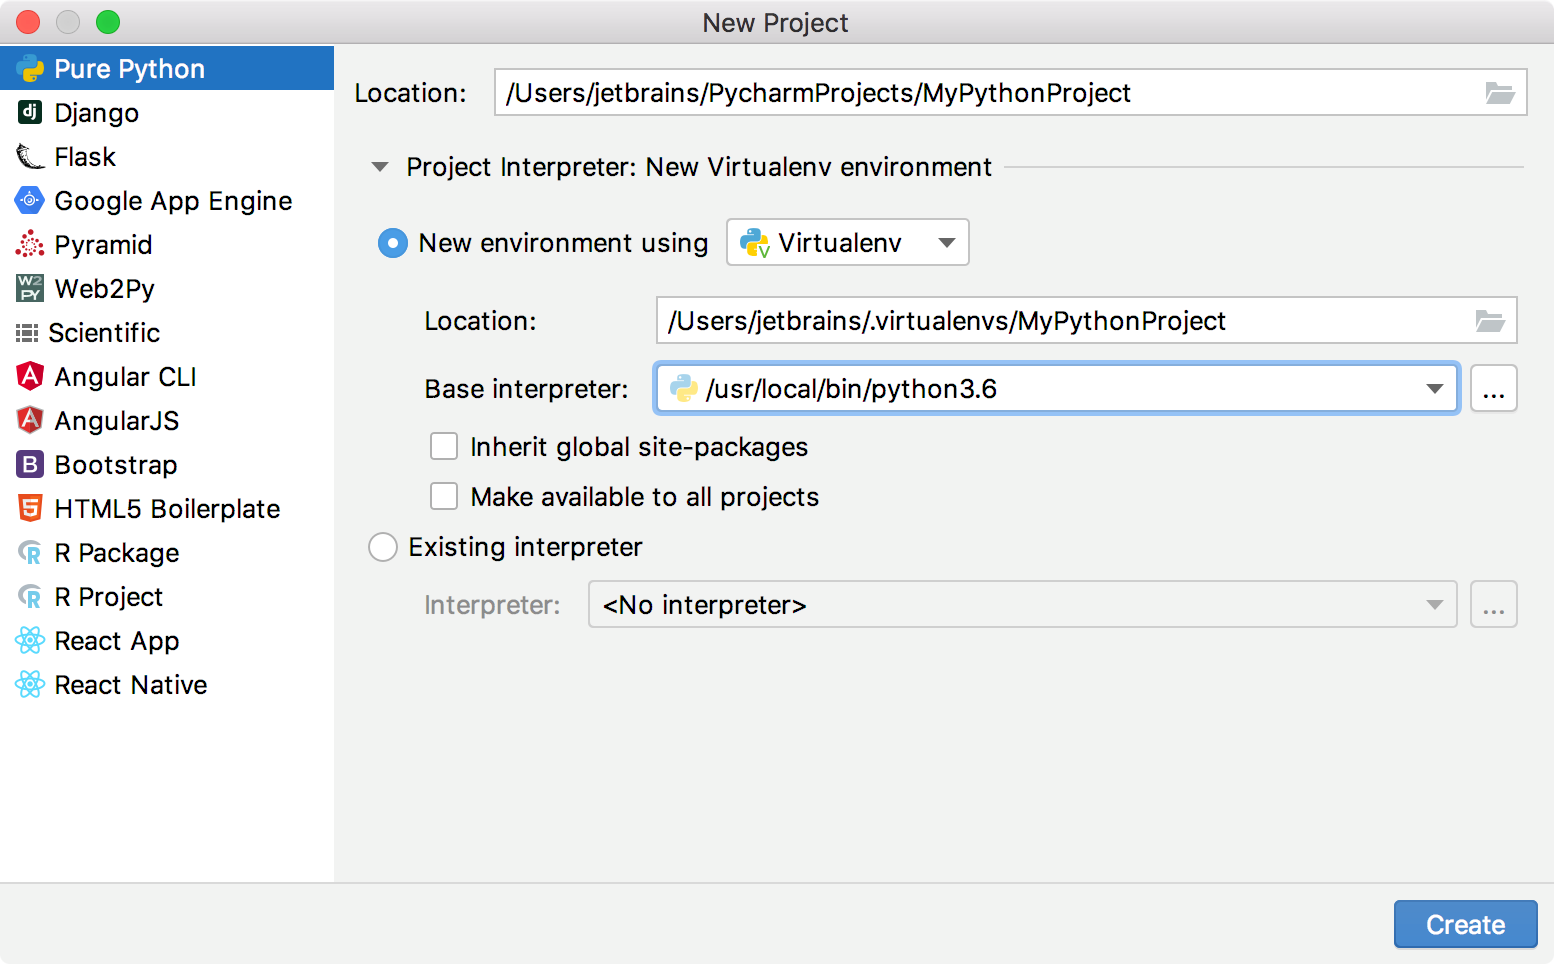 Creating a PyCharm helps implement new project